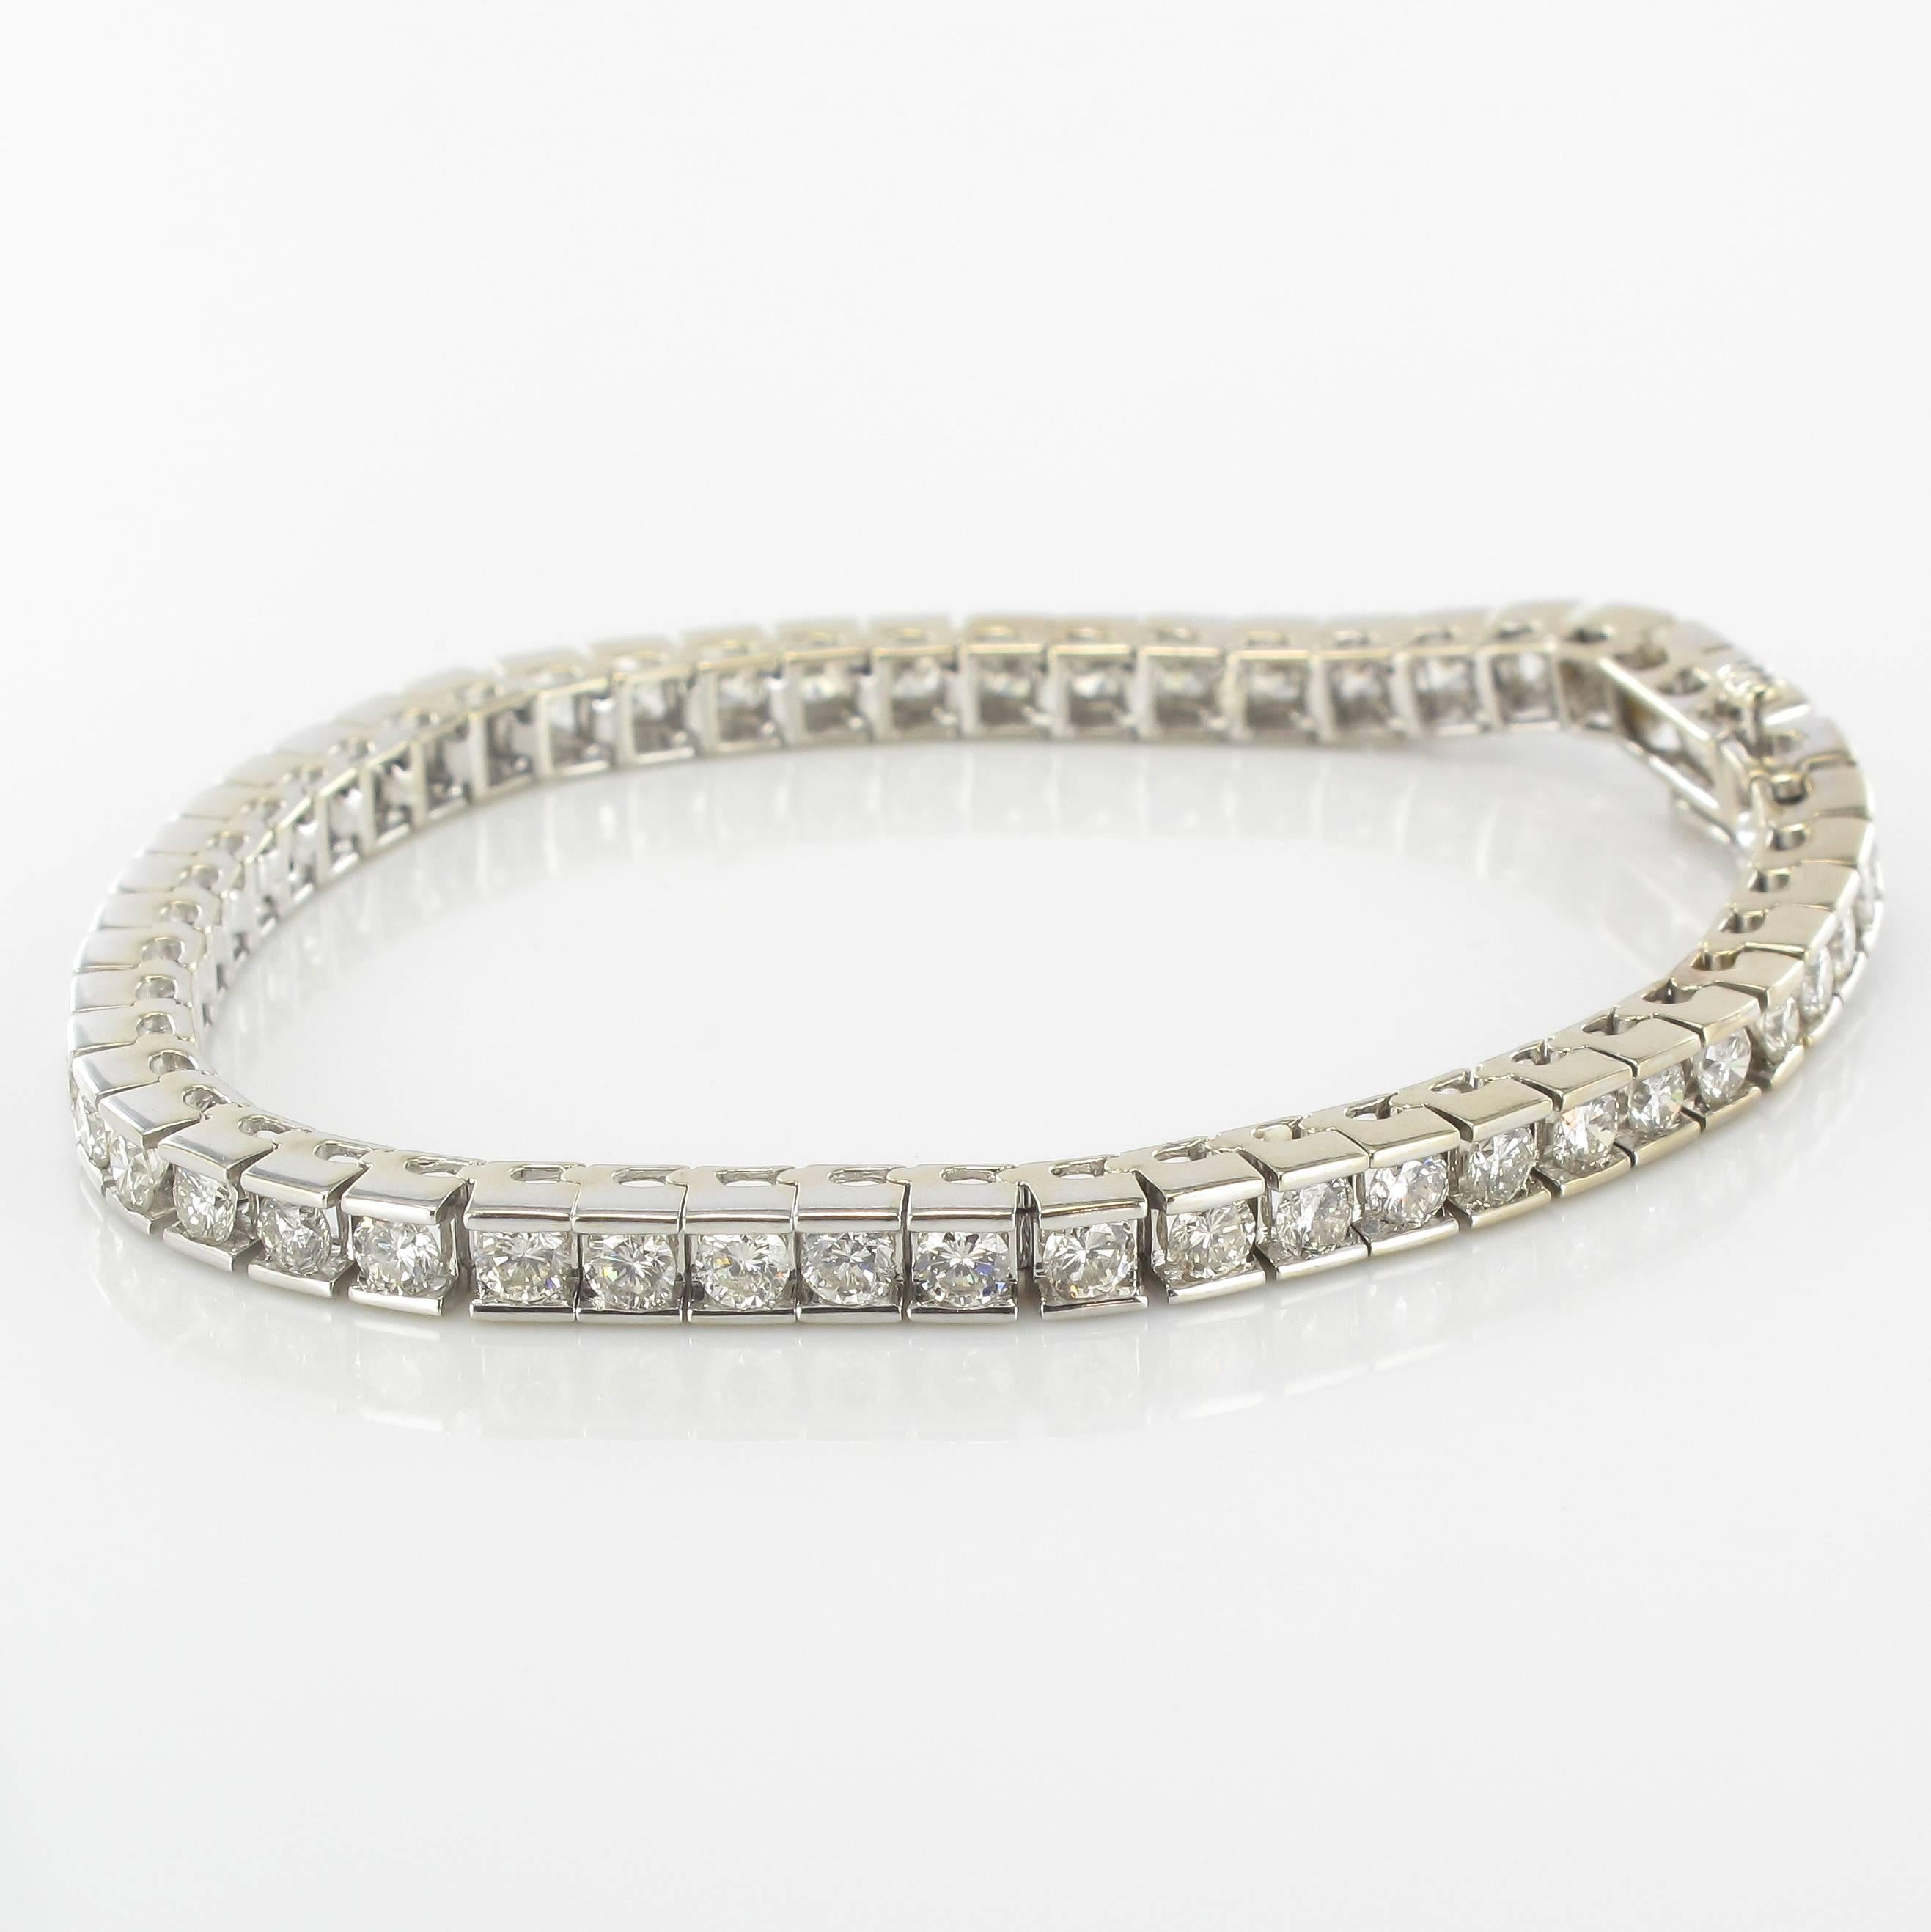 Bracelet in white gold, 585 thousandths, 14 carats.
This strap bracelet is composed of articulated square links each set with a modern brilliant cut diamond. The clasp is in the form of a ratchet with a safety 8 feature. 
A radiant white gold and